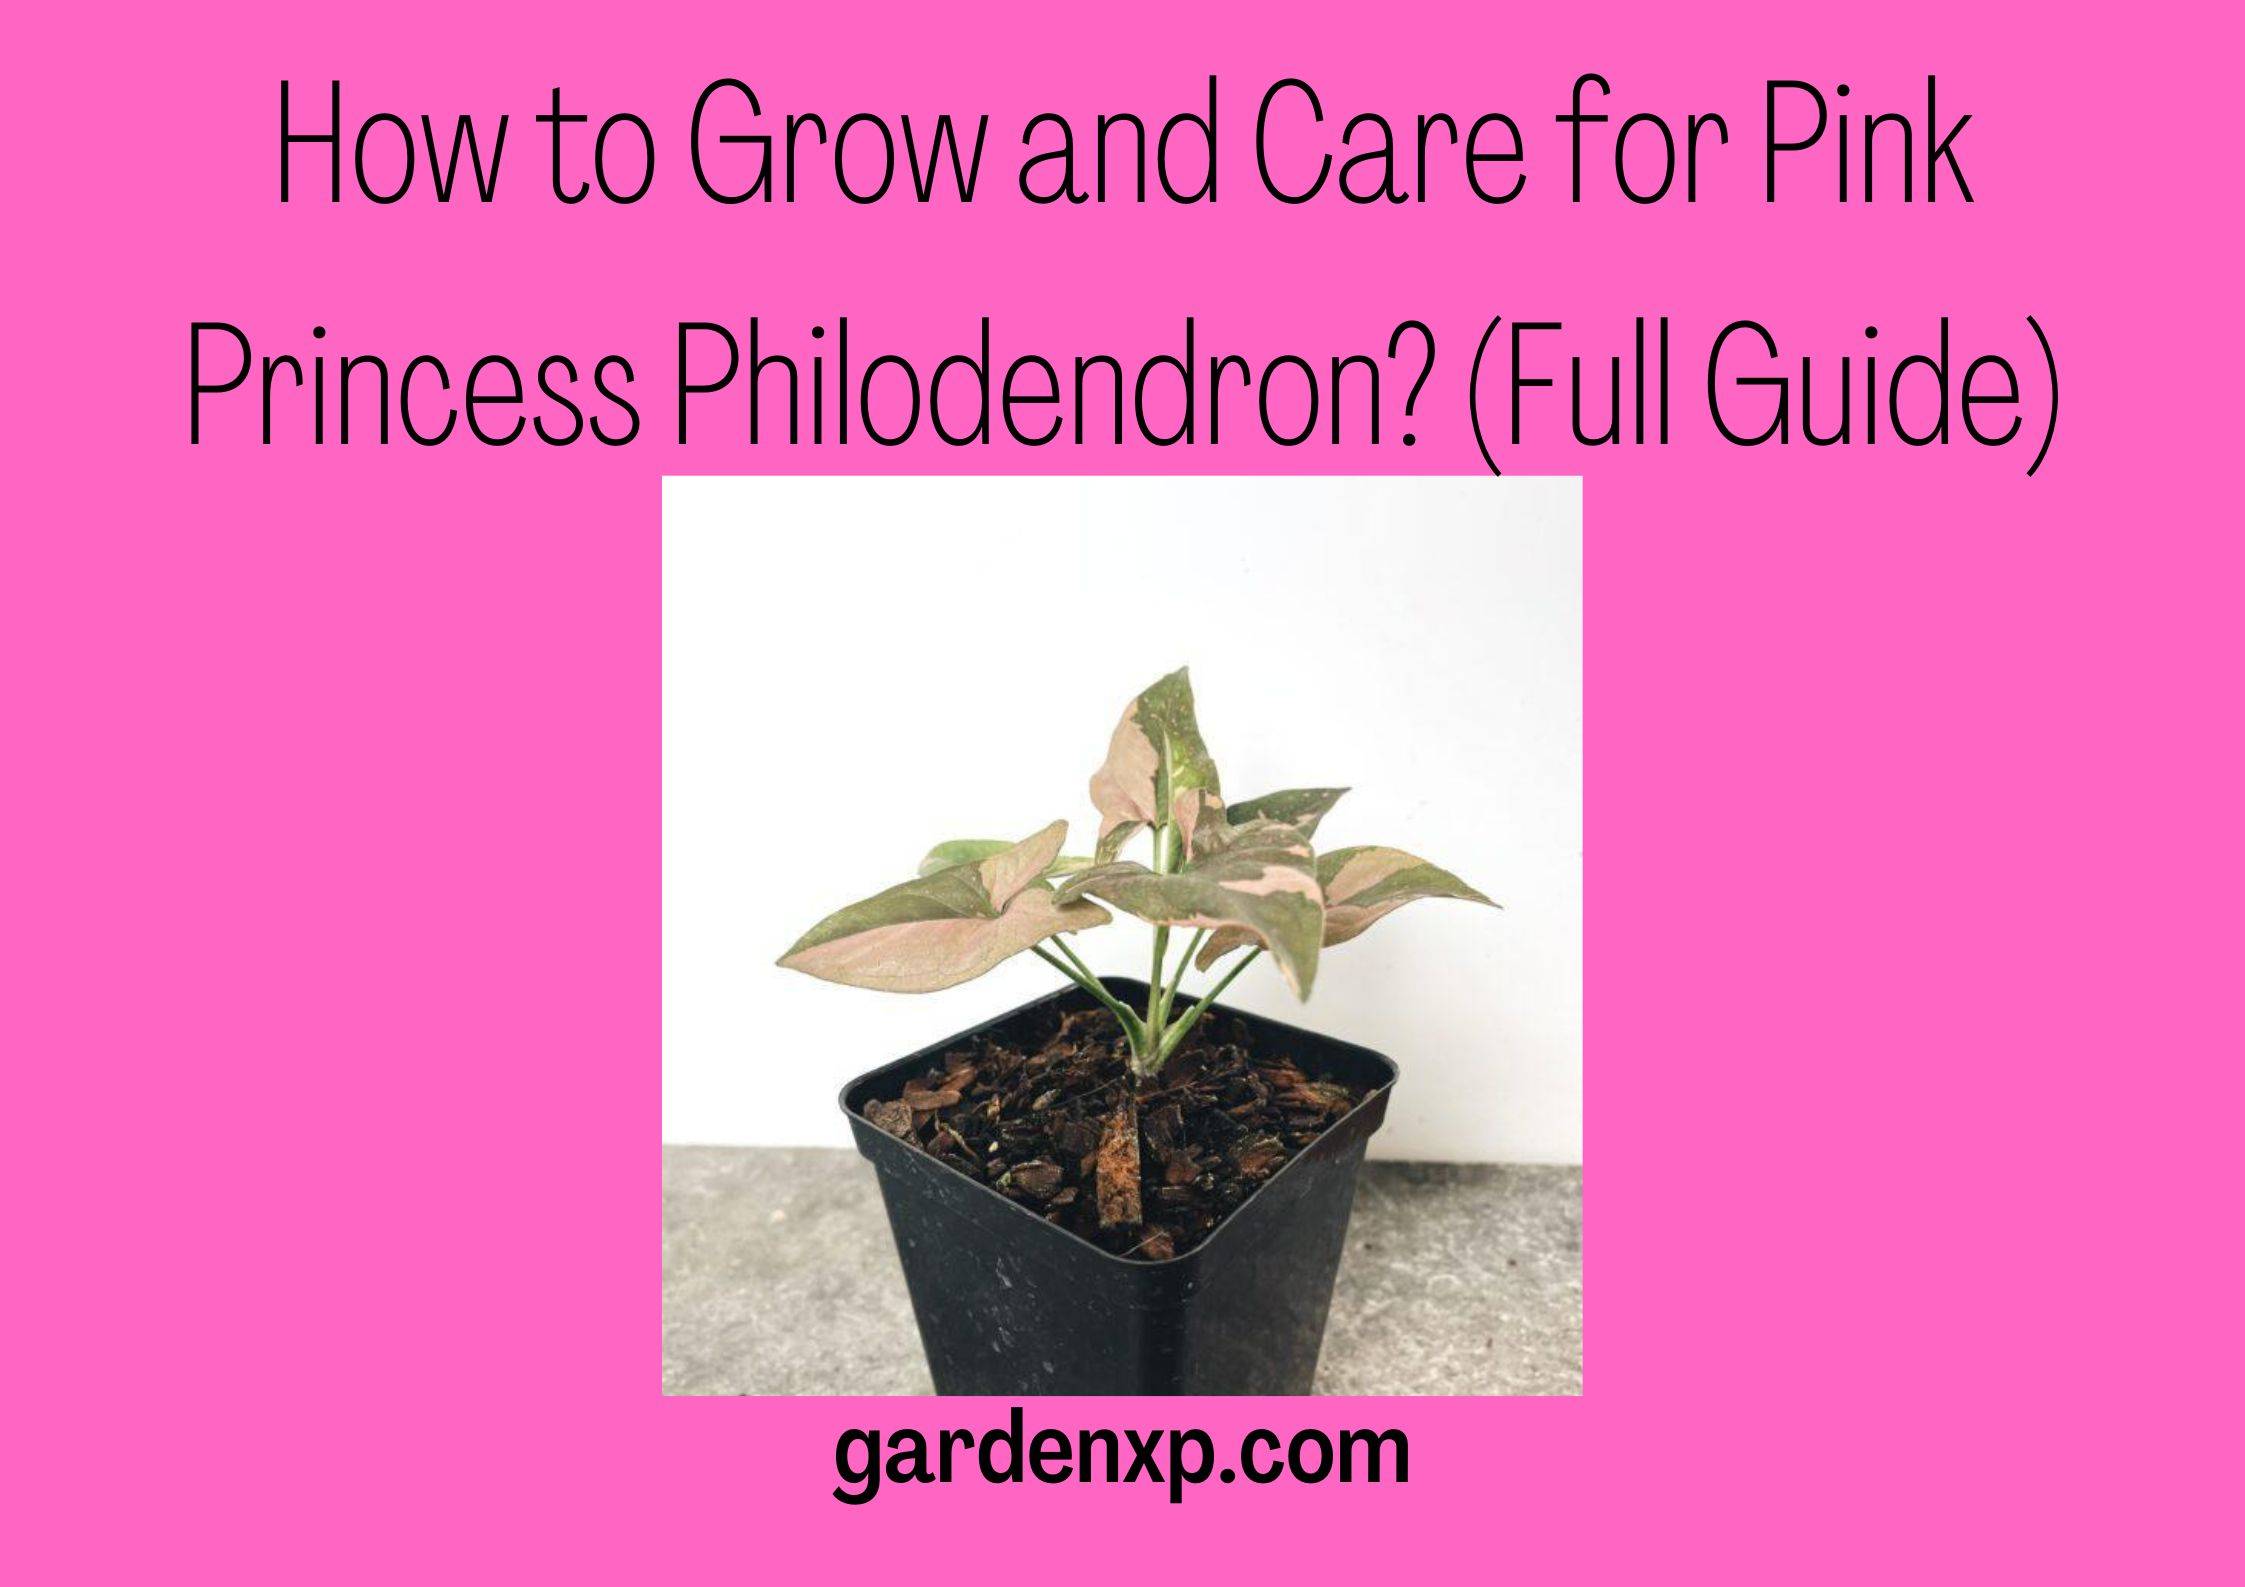 How to Grow and Care for Pink Princess Philodendron (Full Guide)